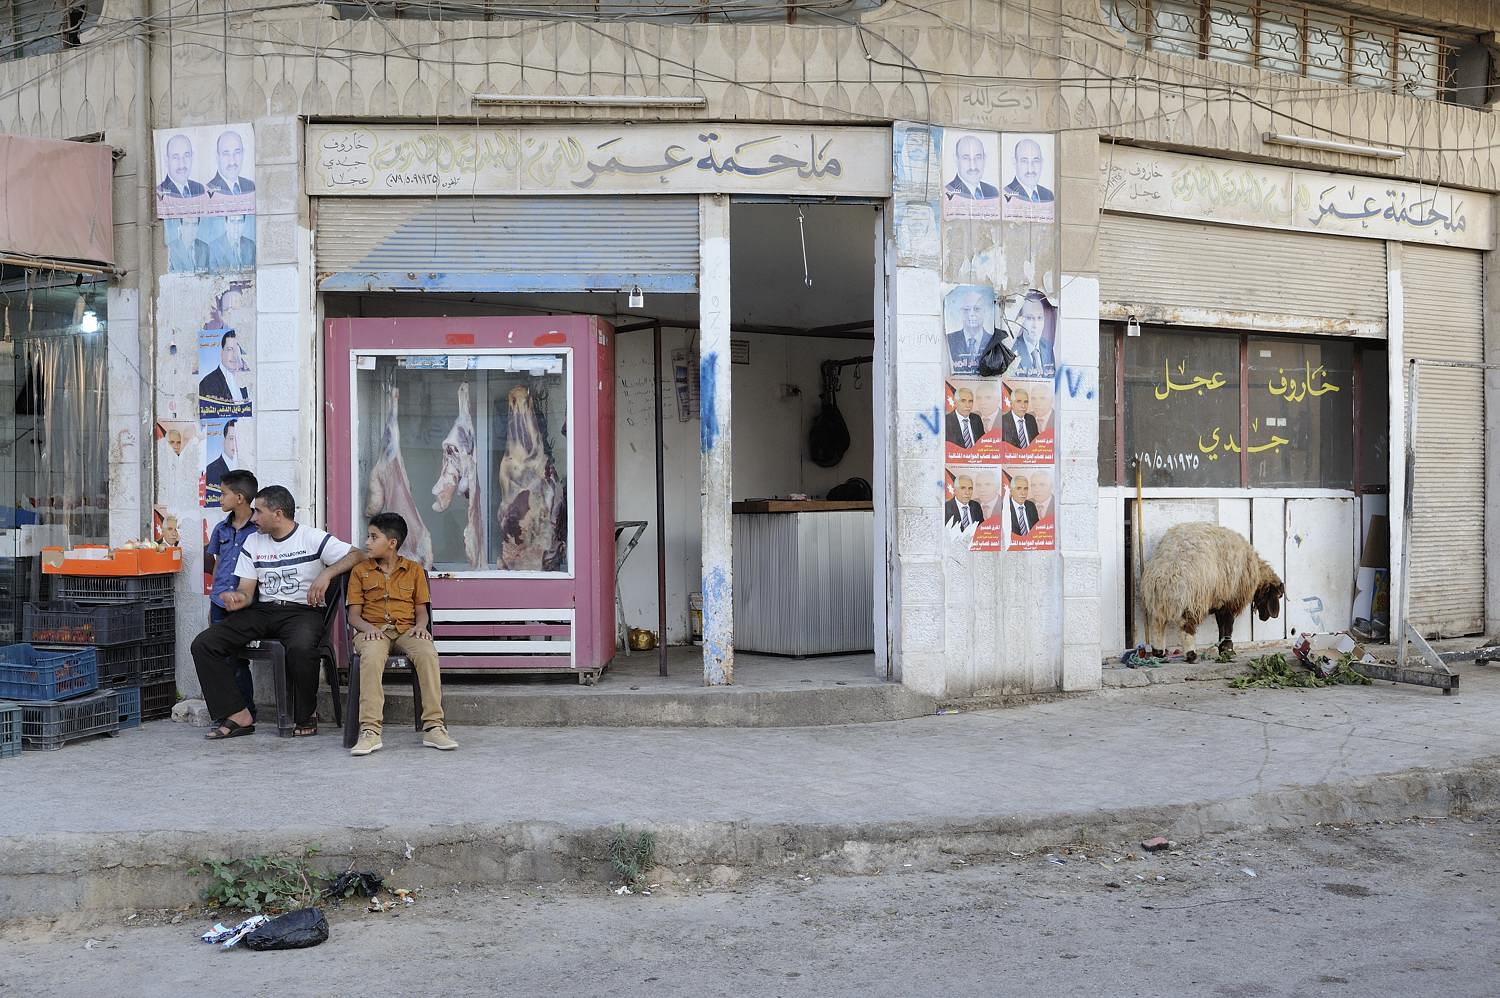  The sleepy provincial town of Mafraq doubled in size since the influx of refugees. Local businesses are flourishing. 